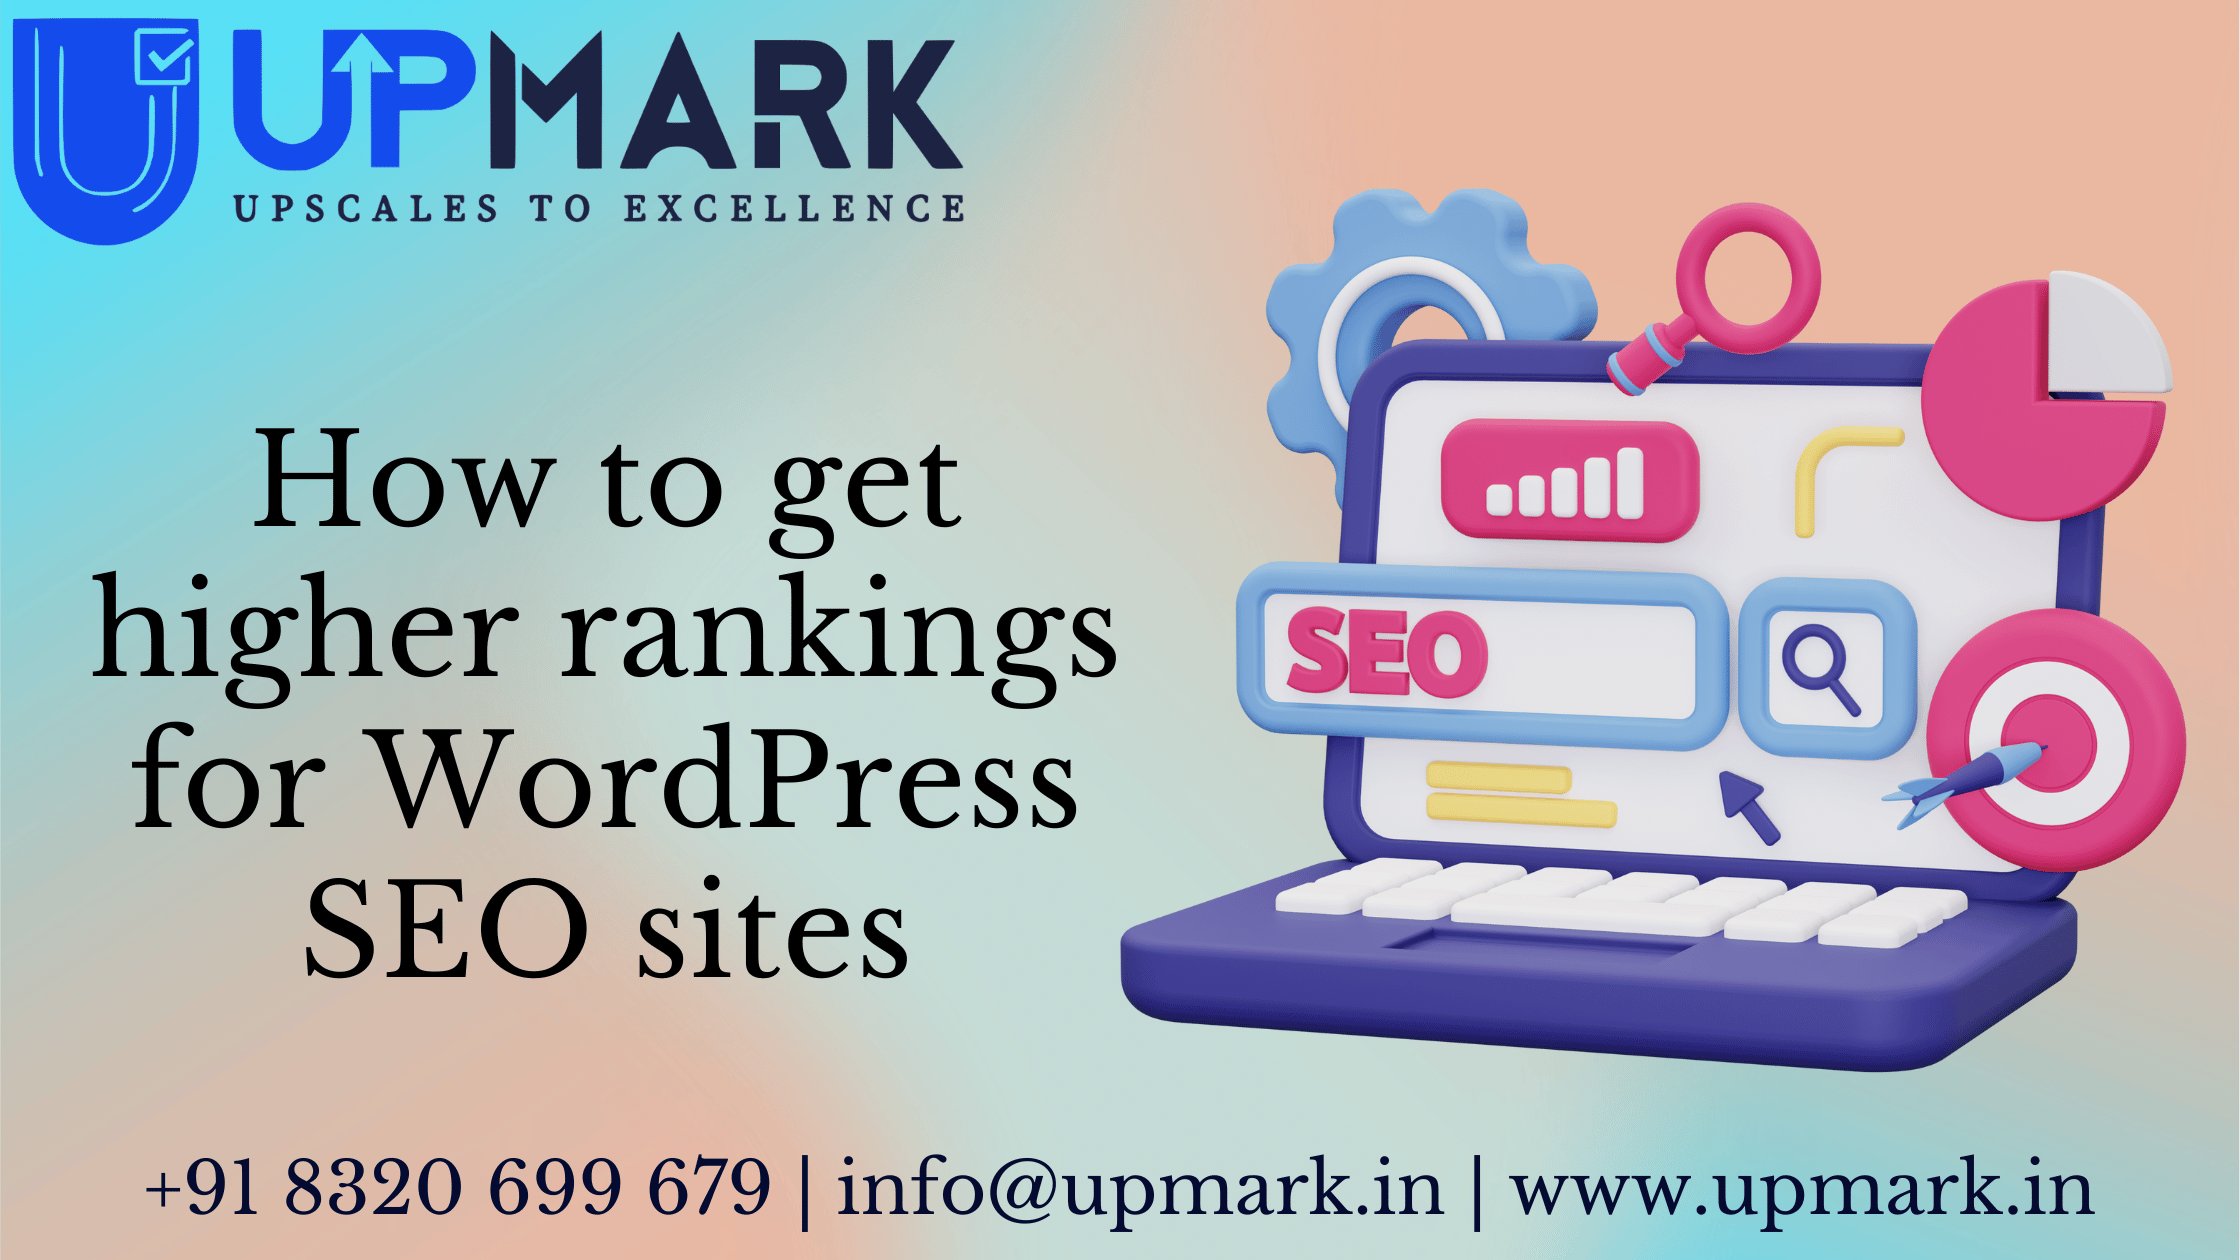 How to get higher rankings for WordPress SEO site